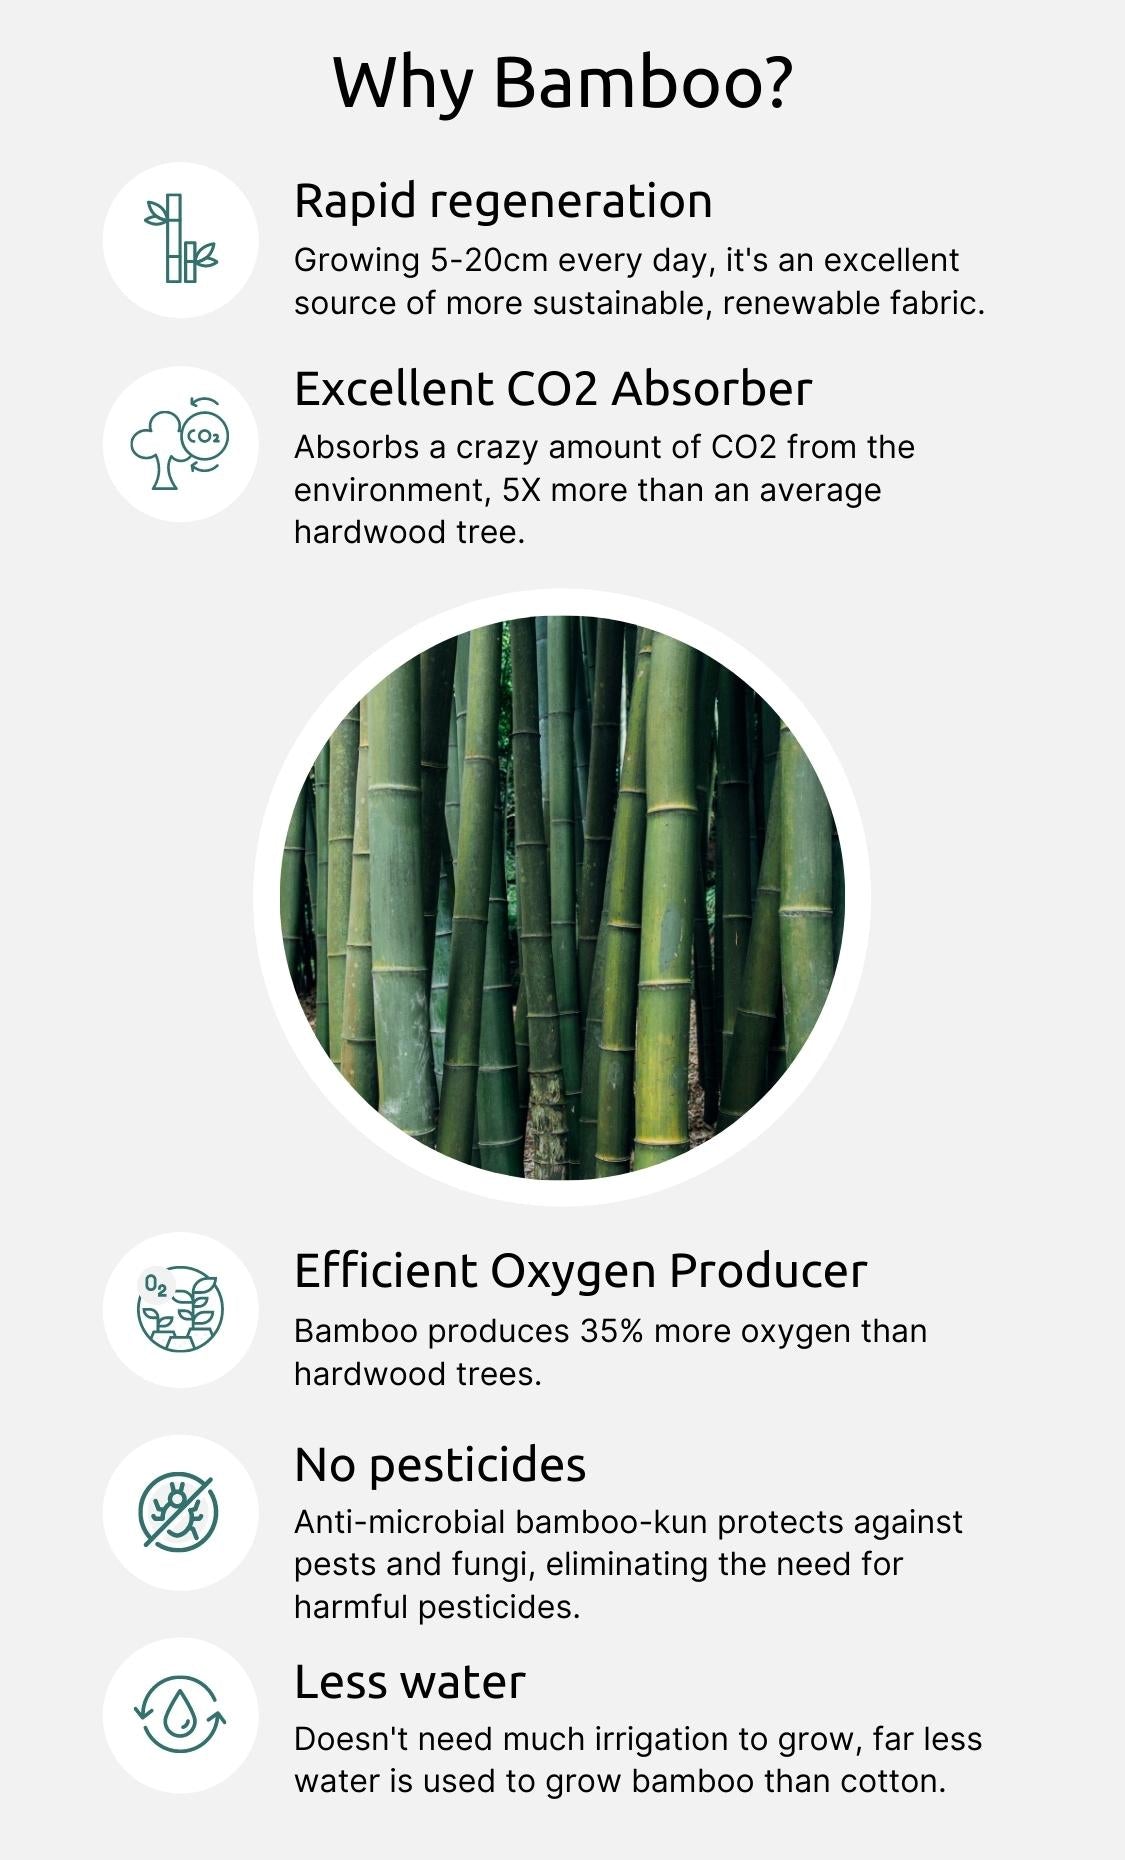 Why Bamboo? (Mobile)